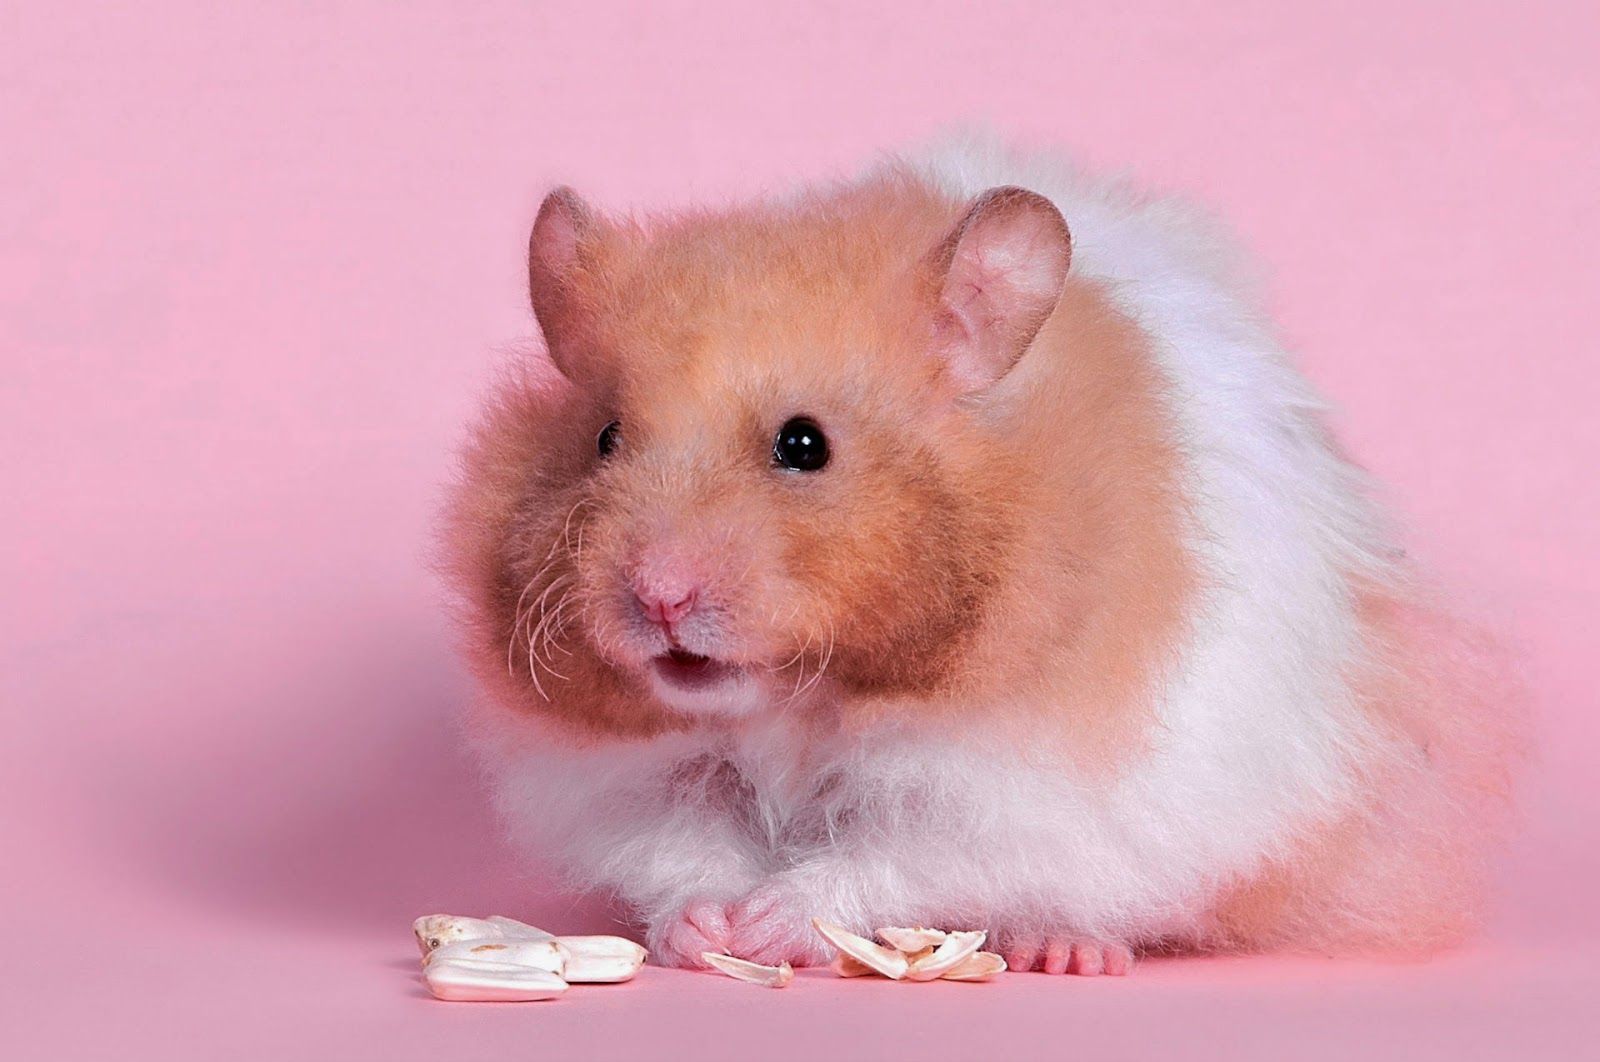 Hamster Wallpapers HD - Beautiful wallpapers collection 2014